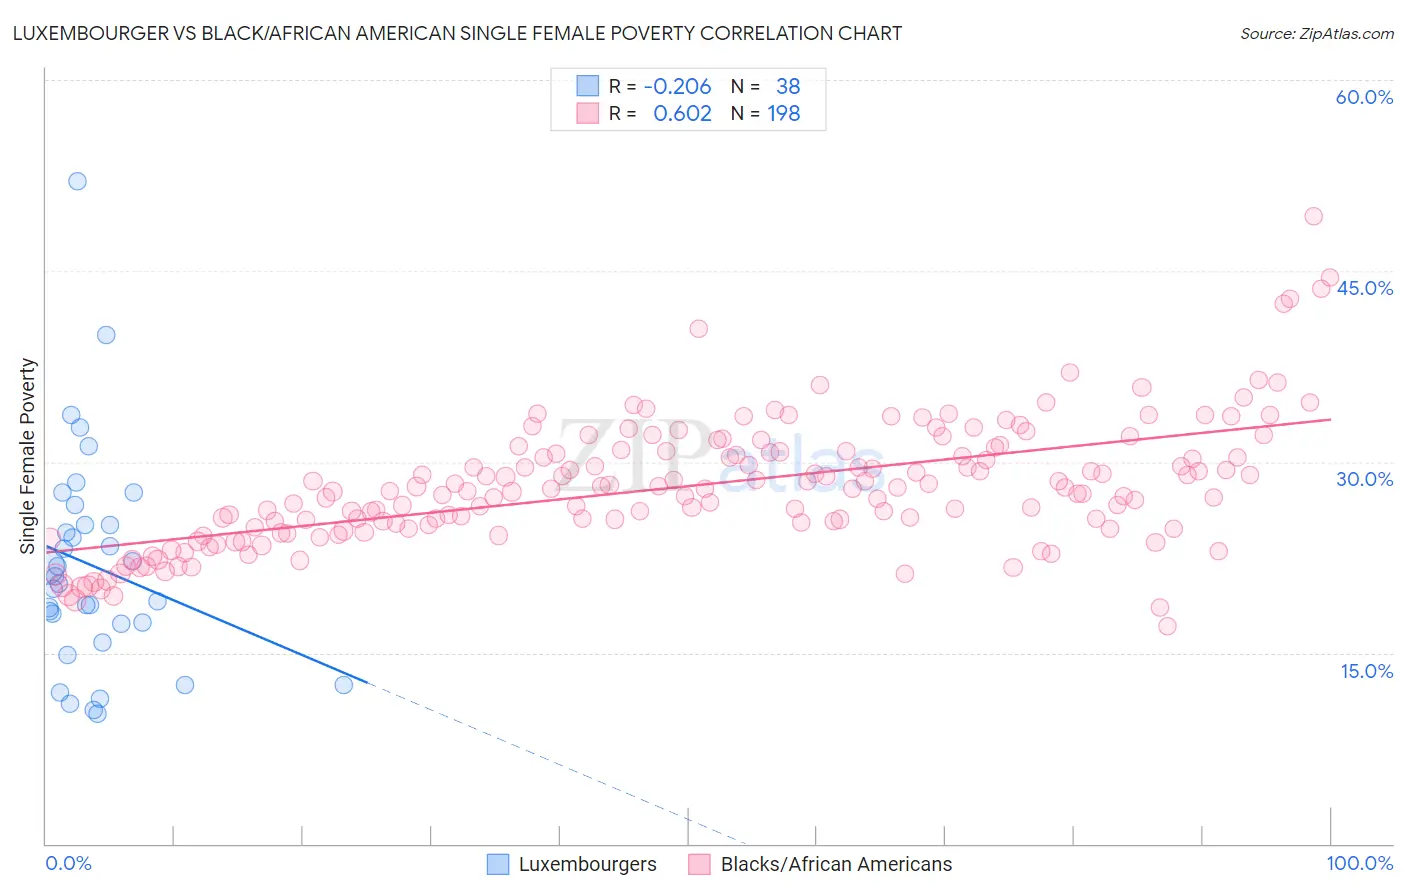 Luxembourger vs Black/African American Single Female Poverty